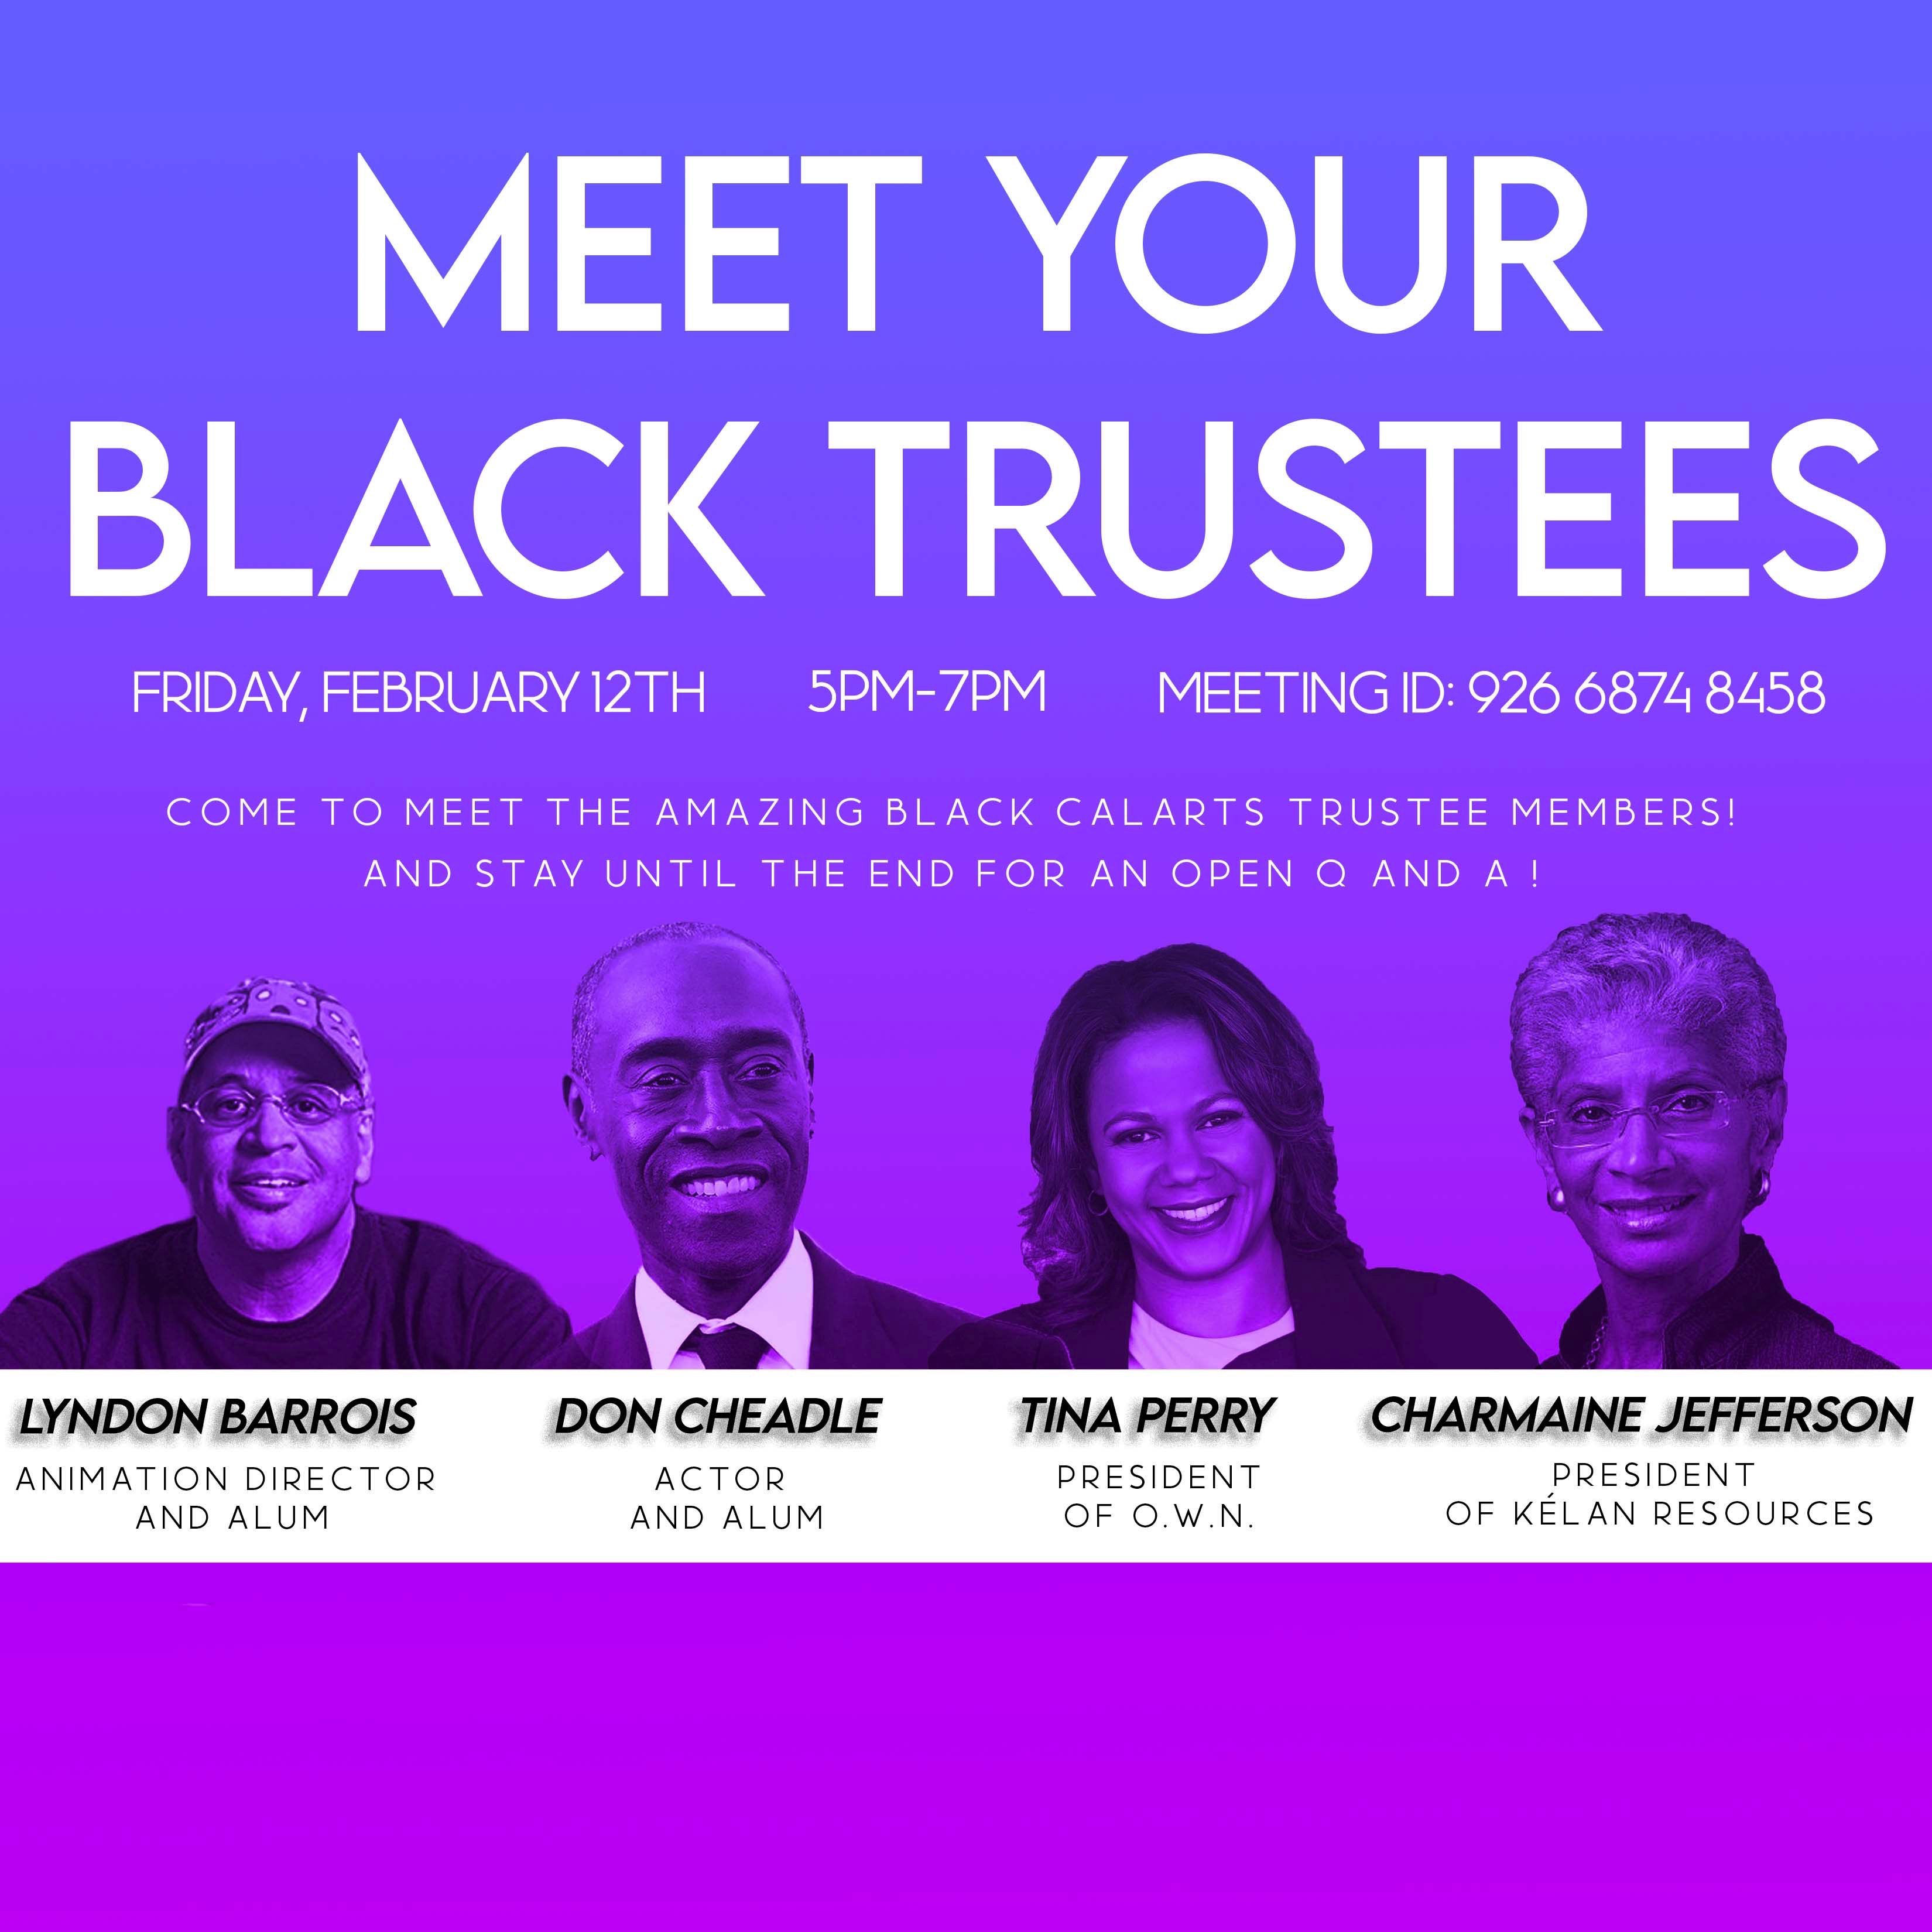 Meet Your Black Trustees Poster Image